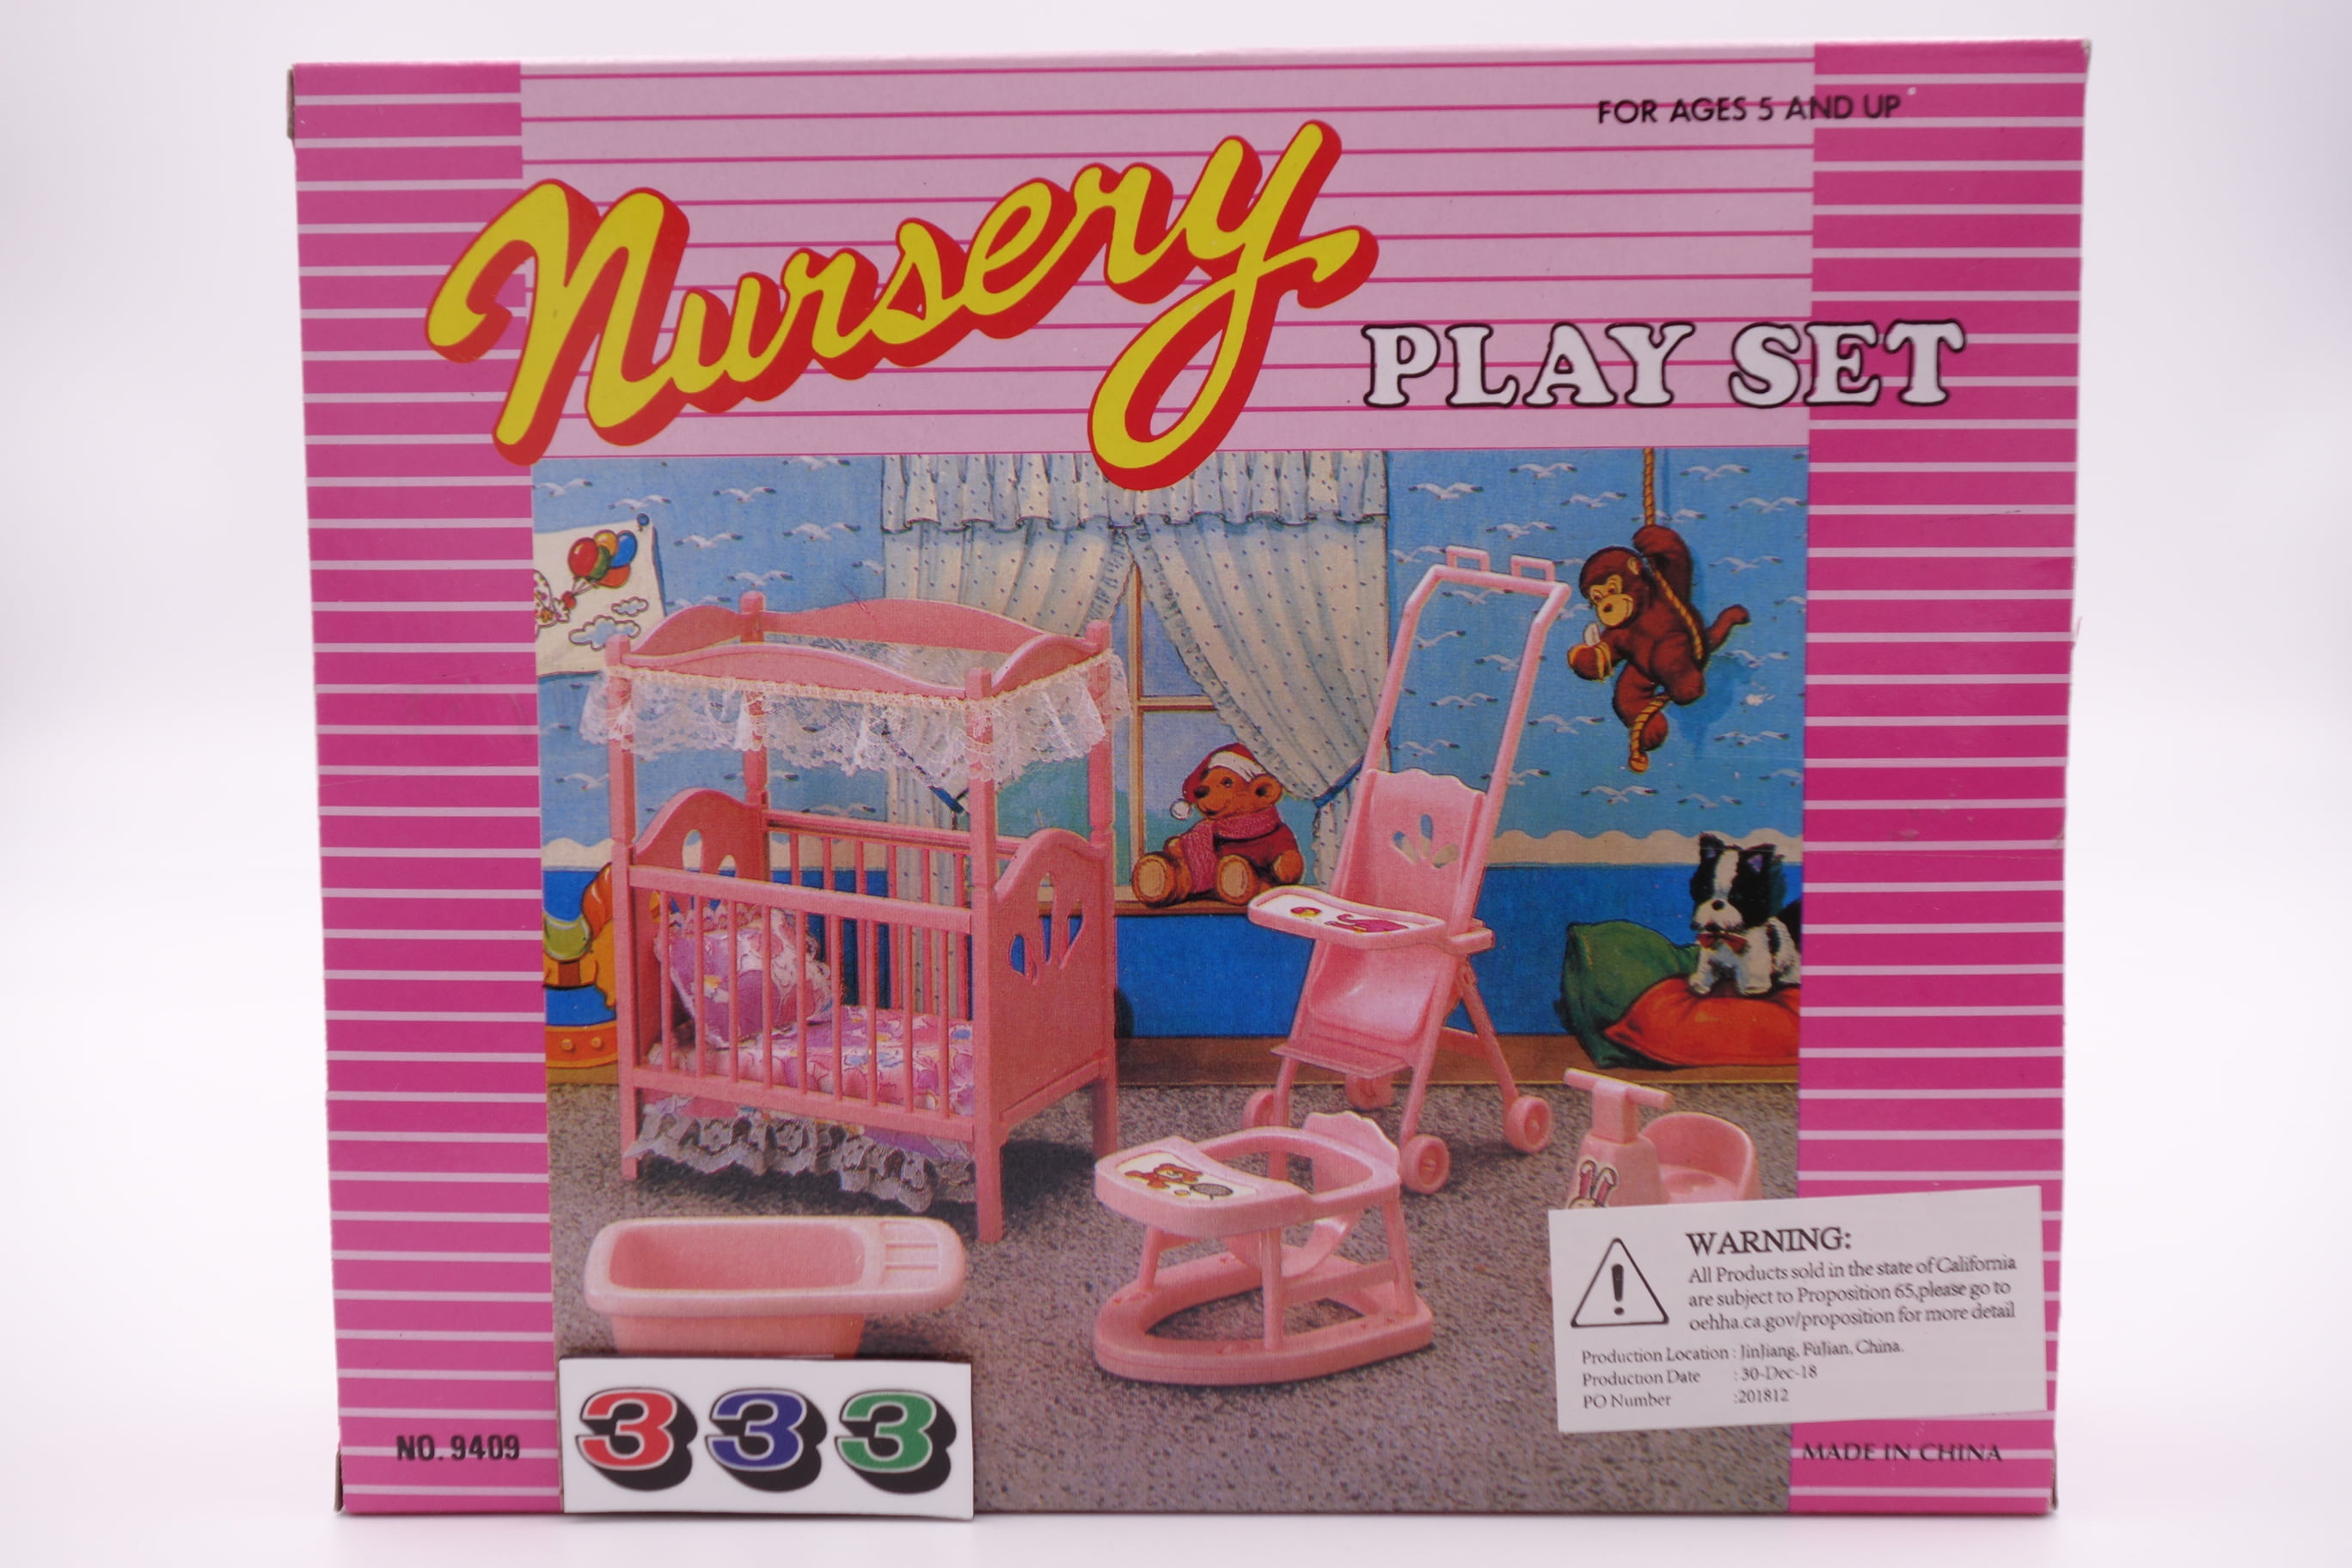 My Mini Mixieq's Theater Deluxe Playset Mattel 79f2zn1 DXD61 for sale online 